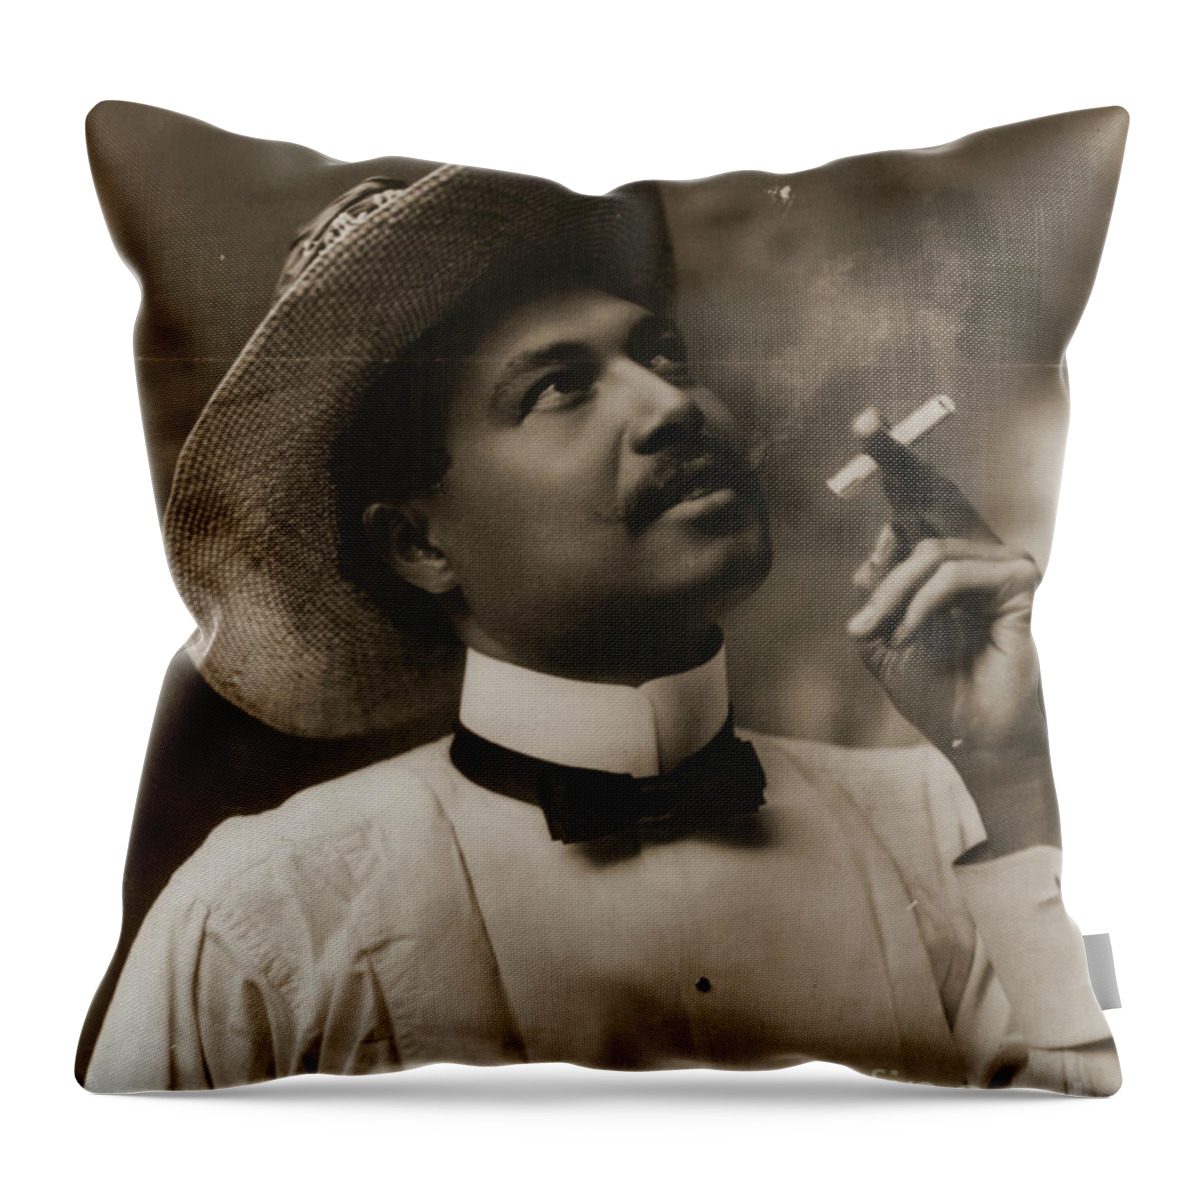 Connoisseur 1899 Throw Pillow featuring the photograph Connoisseur 1899 by Padre Art